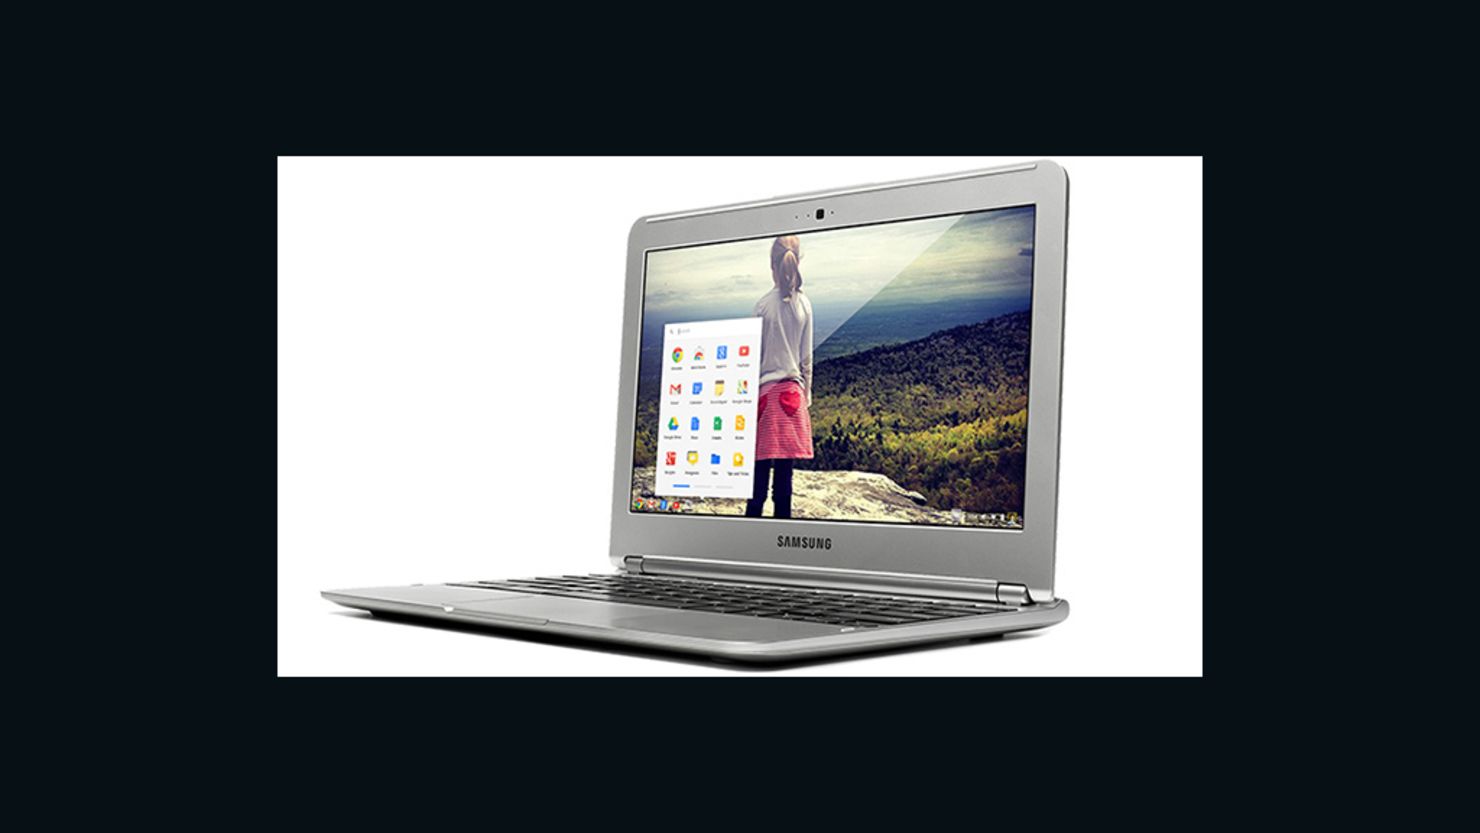 The new $250 Chromebook laptop from Google, made by Samsung.